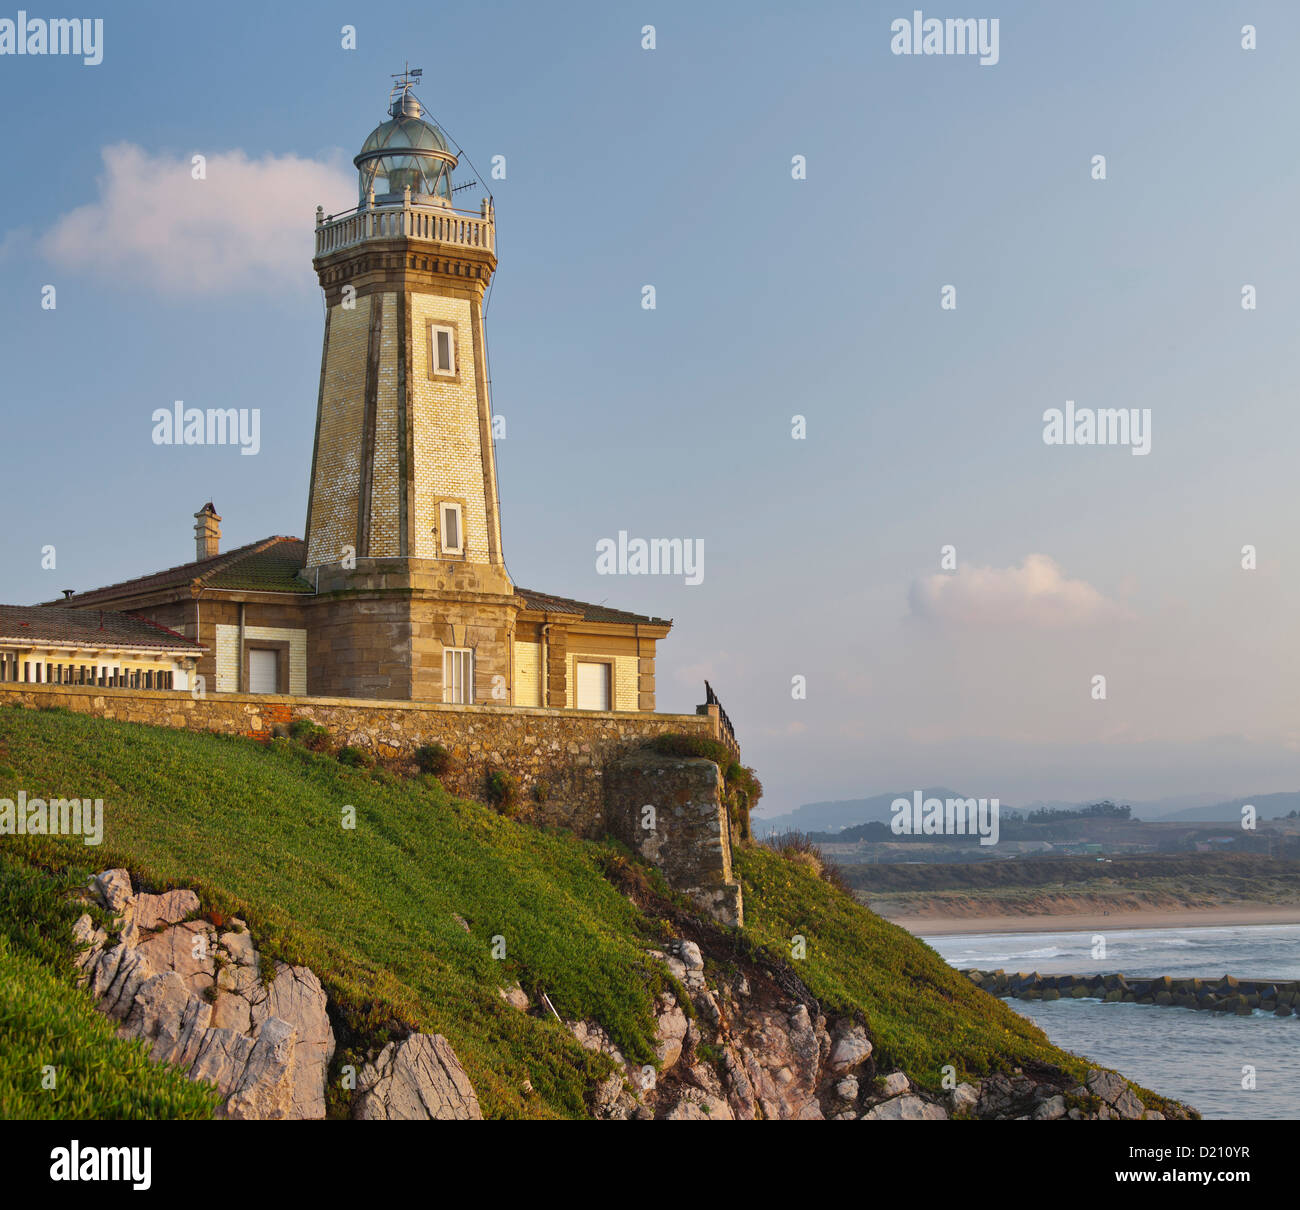 Lighthouse, Aviles, Bay of Biscay, Asturias, Spain Stock Photo